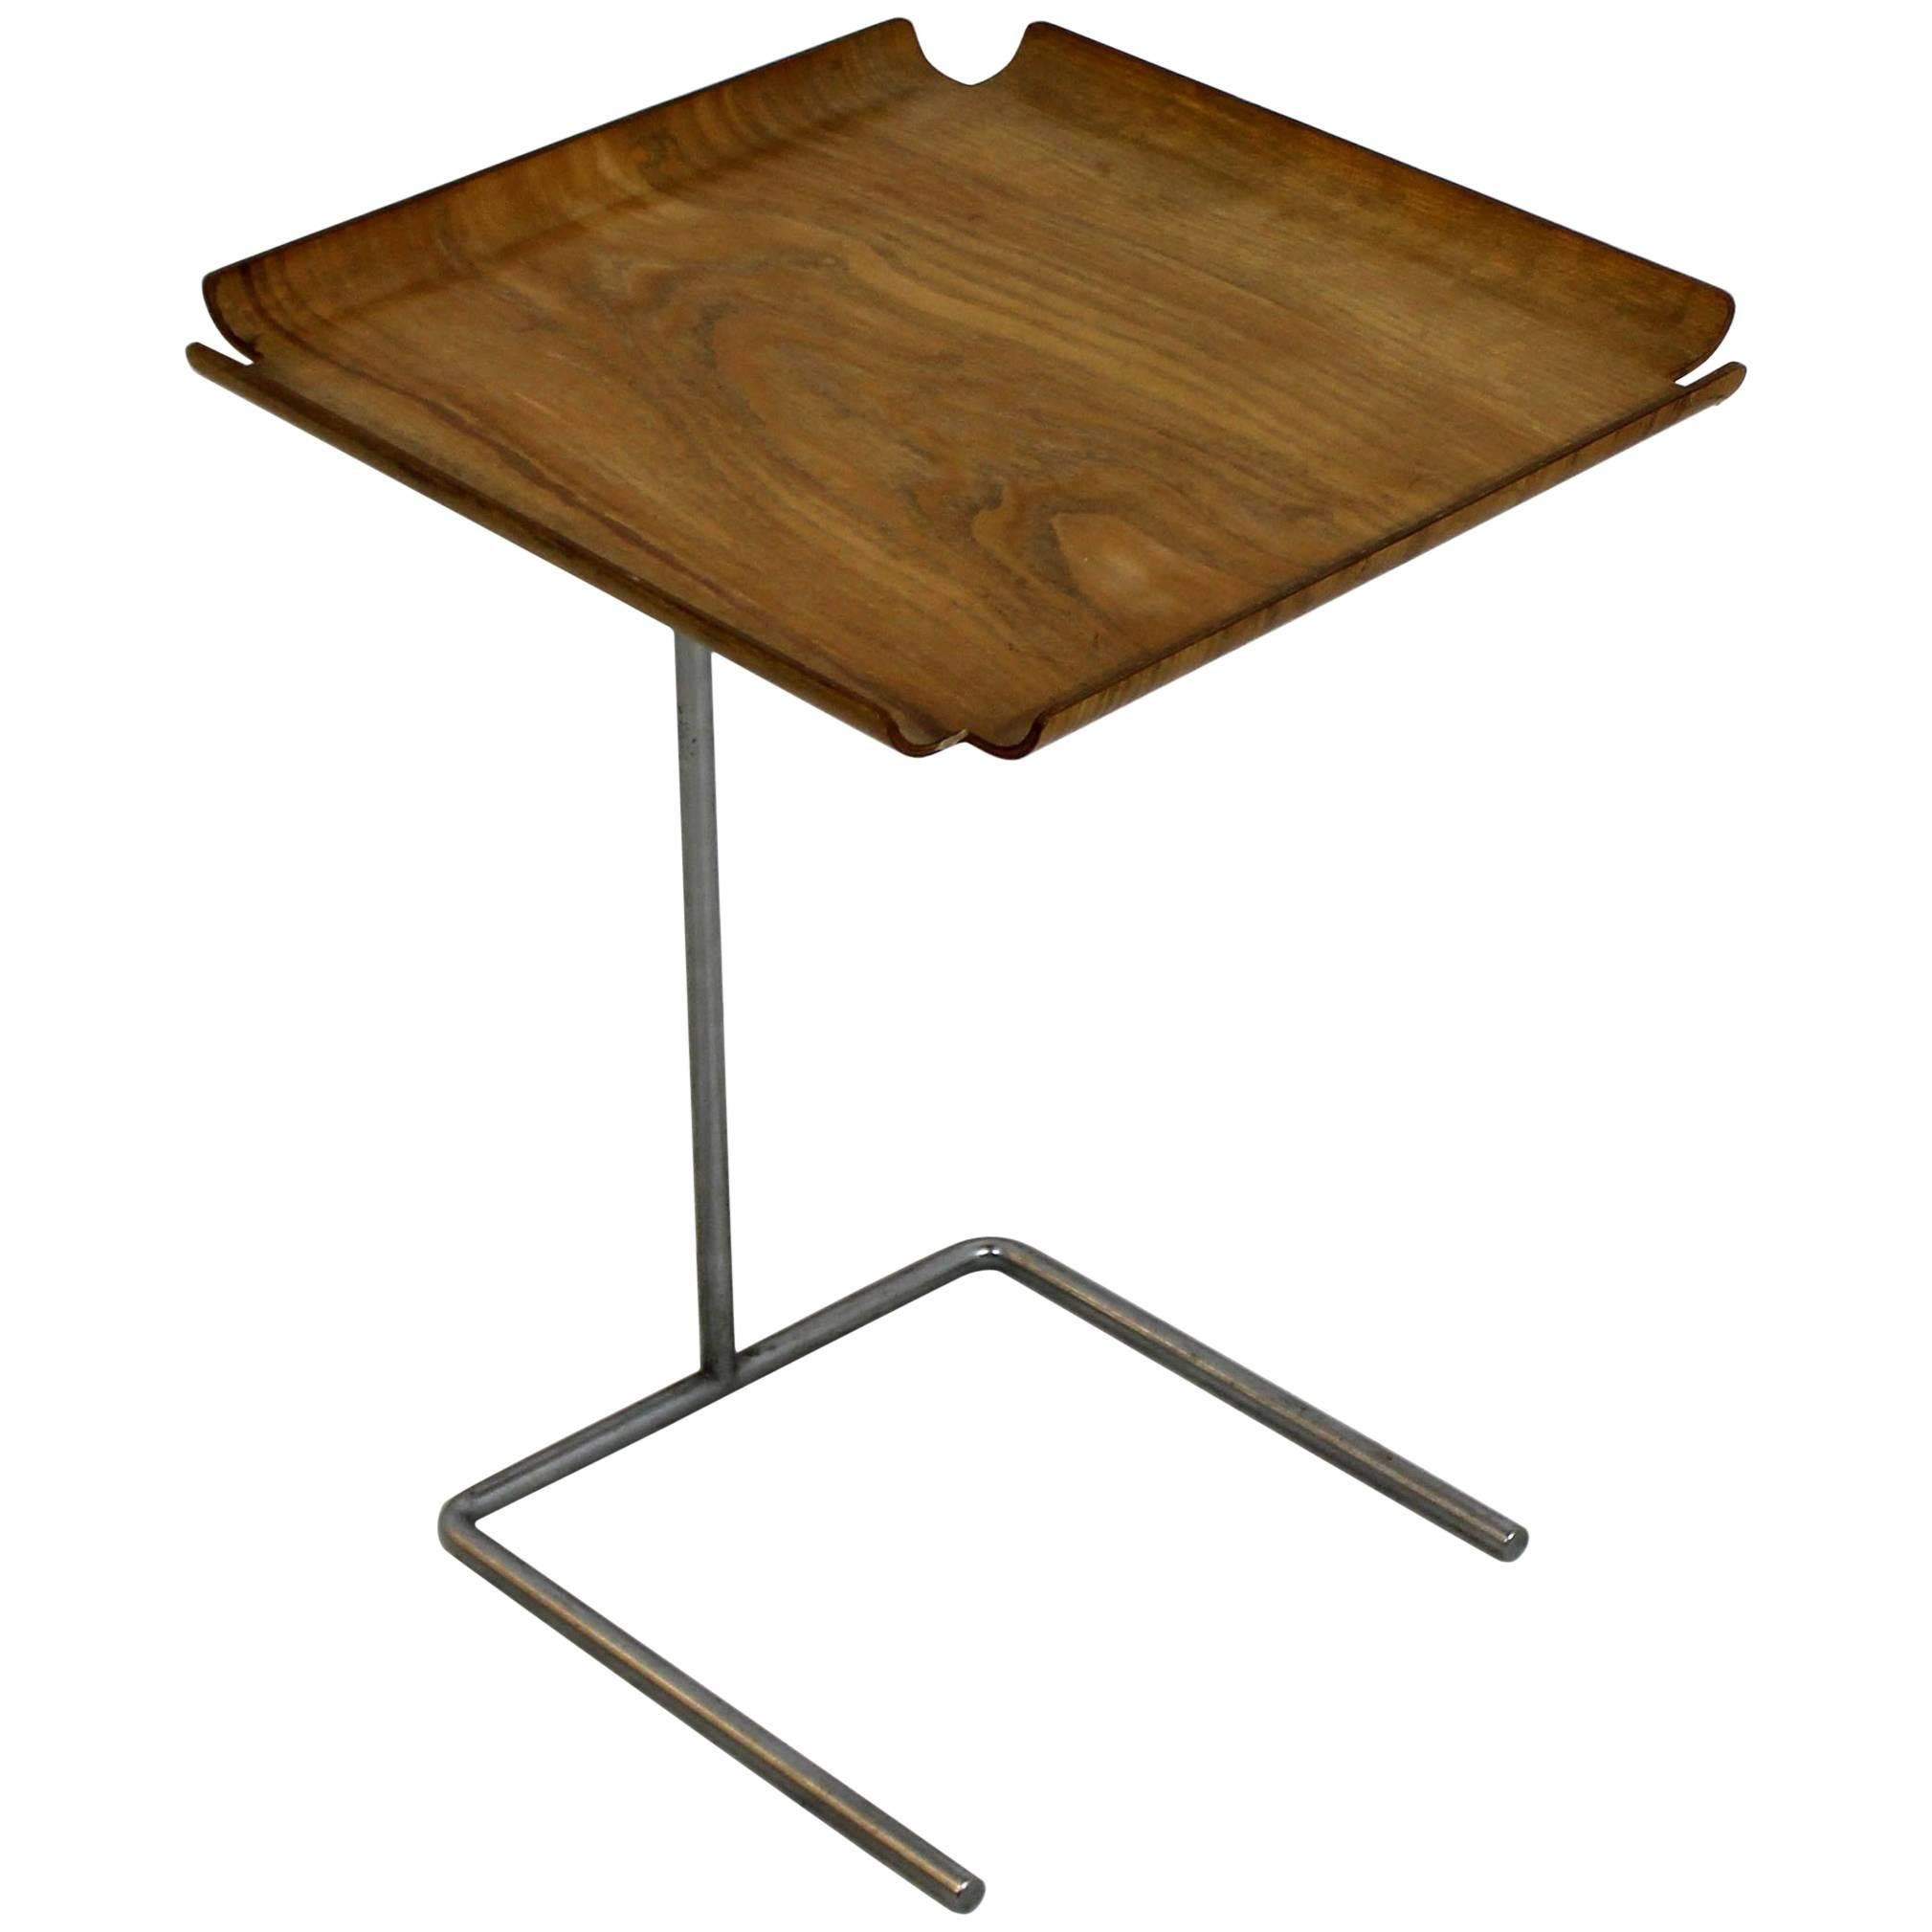 Mid-Century Modern George Nelson Early Edition Side Tray Table, 1950s, Wood